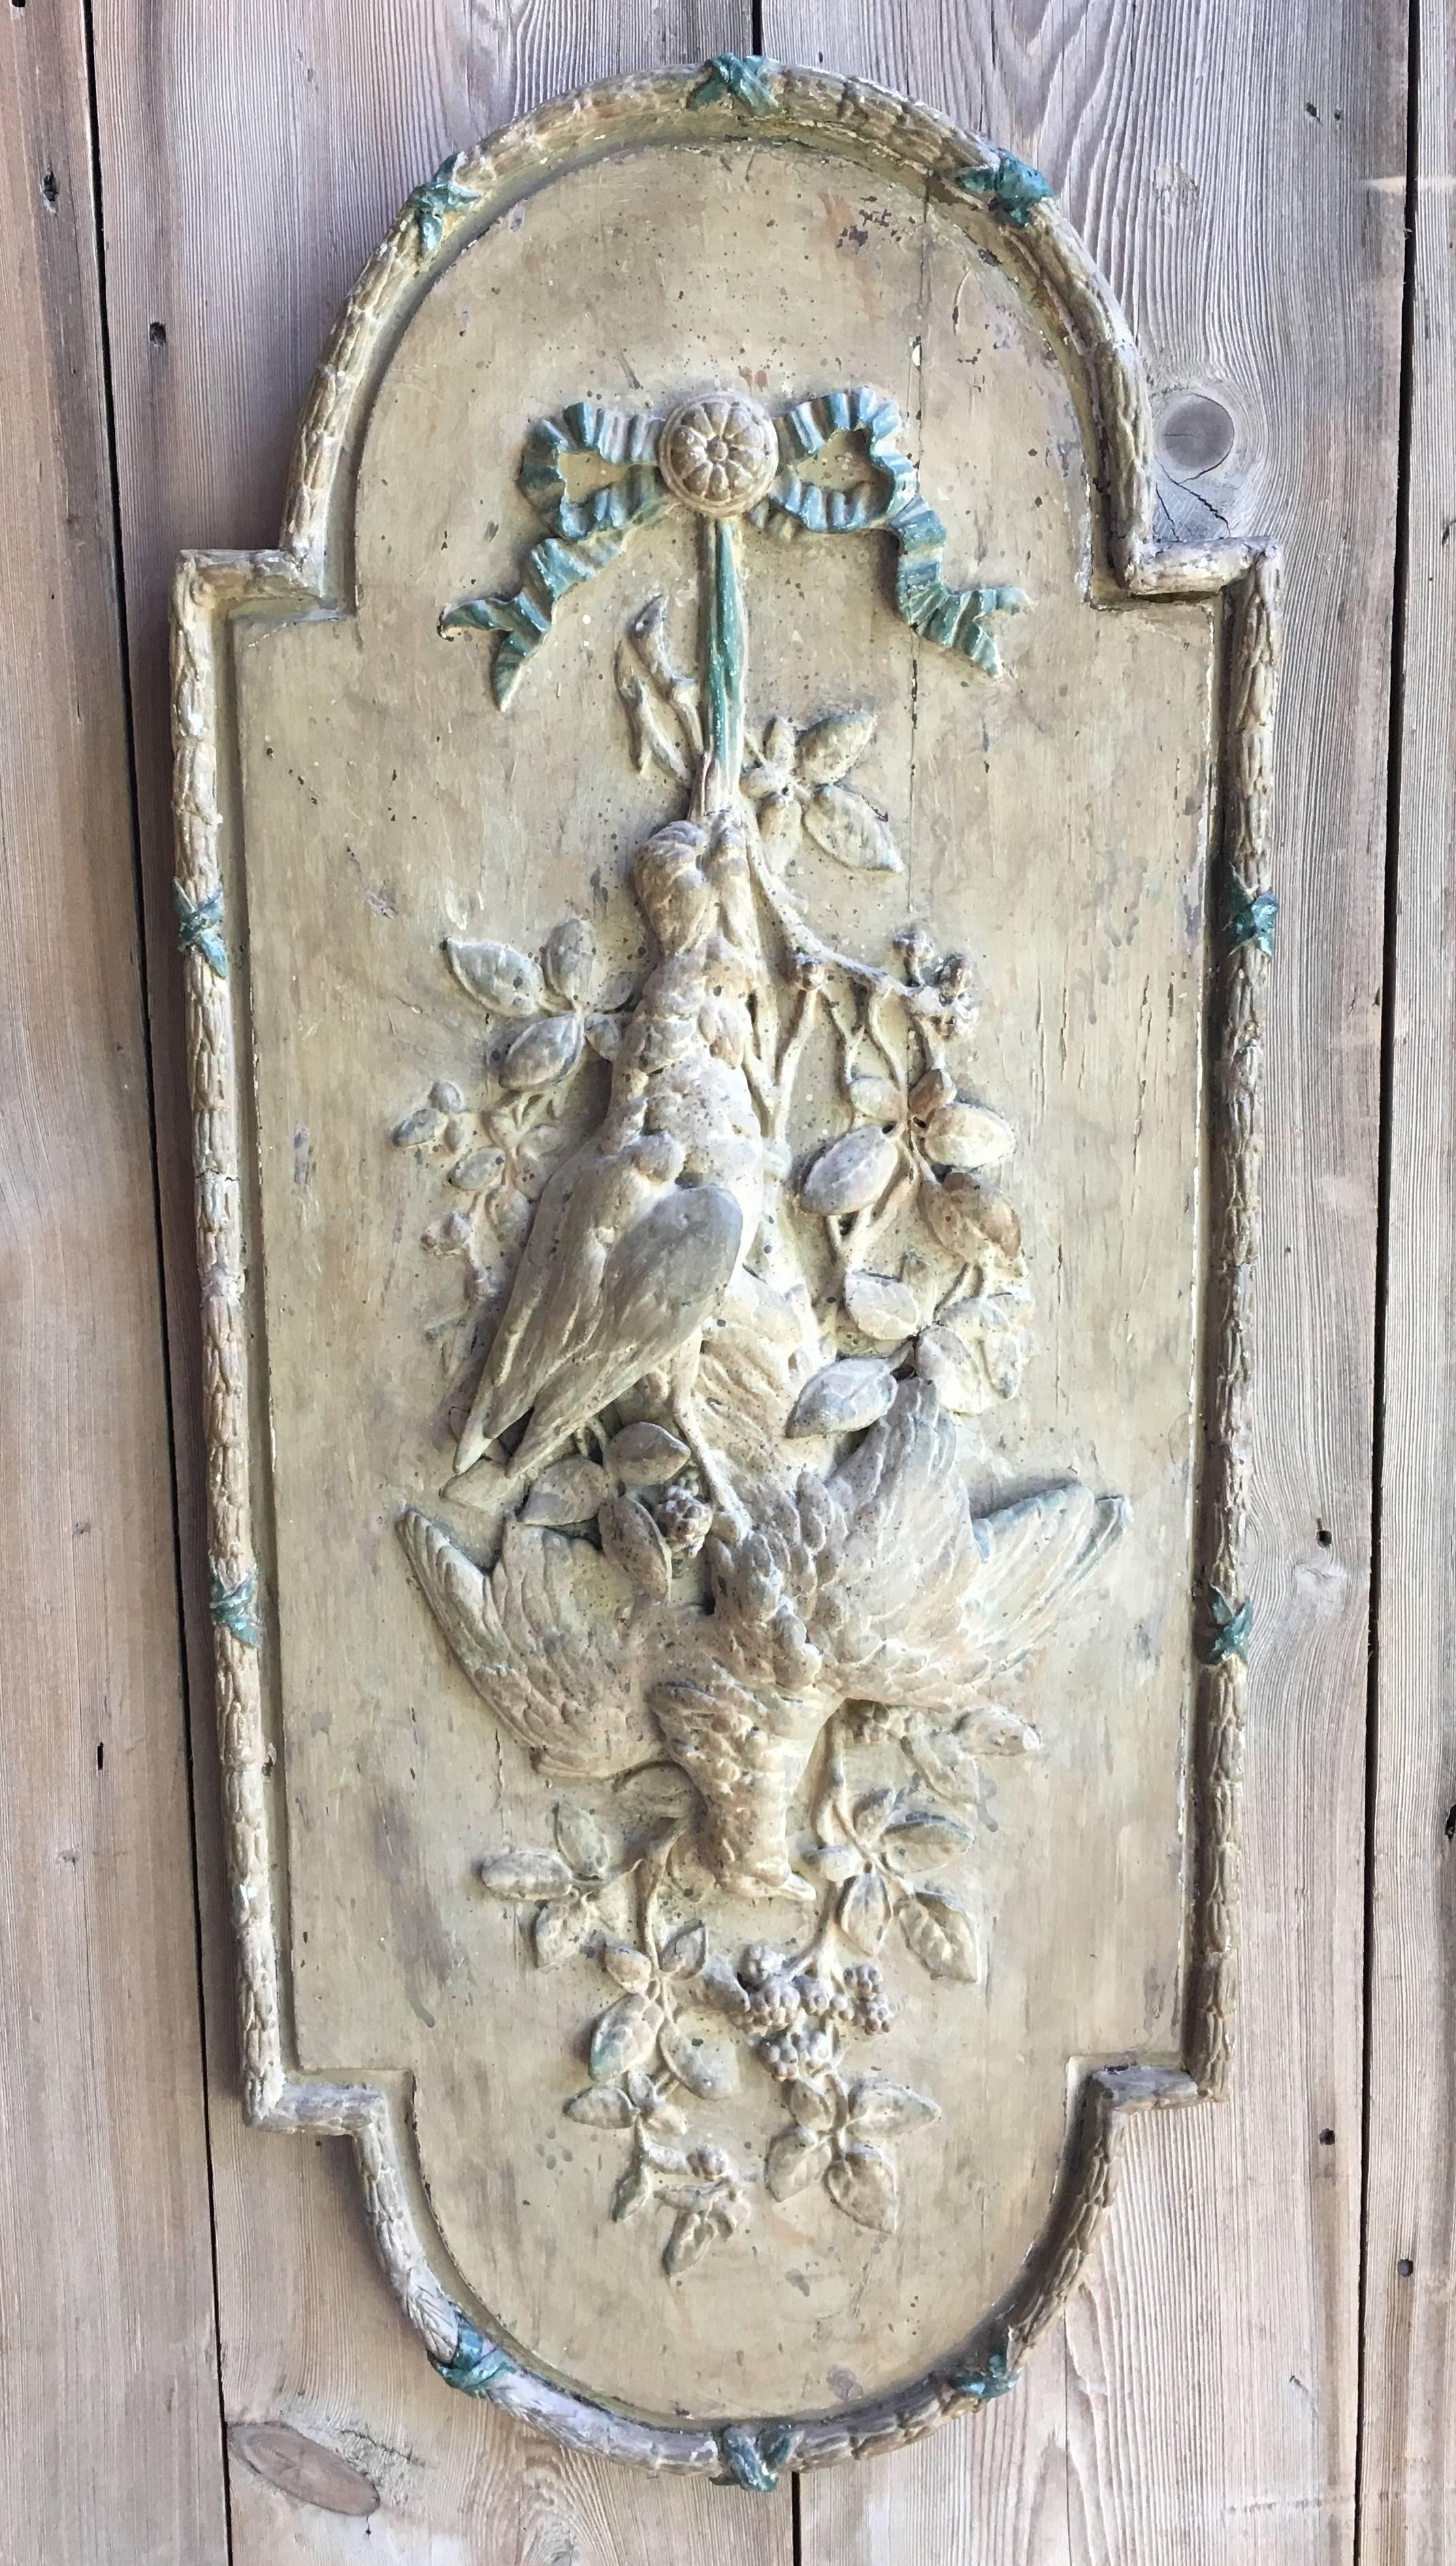 A French Louis XVI decorative trophy panel from a boiseries, late 18th-early 19th century, depicting the hunt with game birds and garlands, the edge bordered in a carved molding.